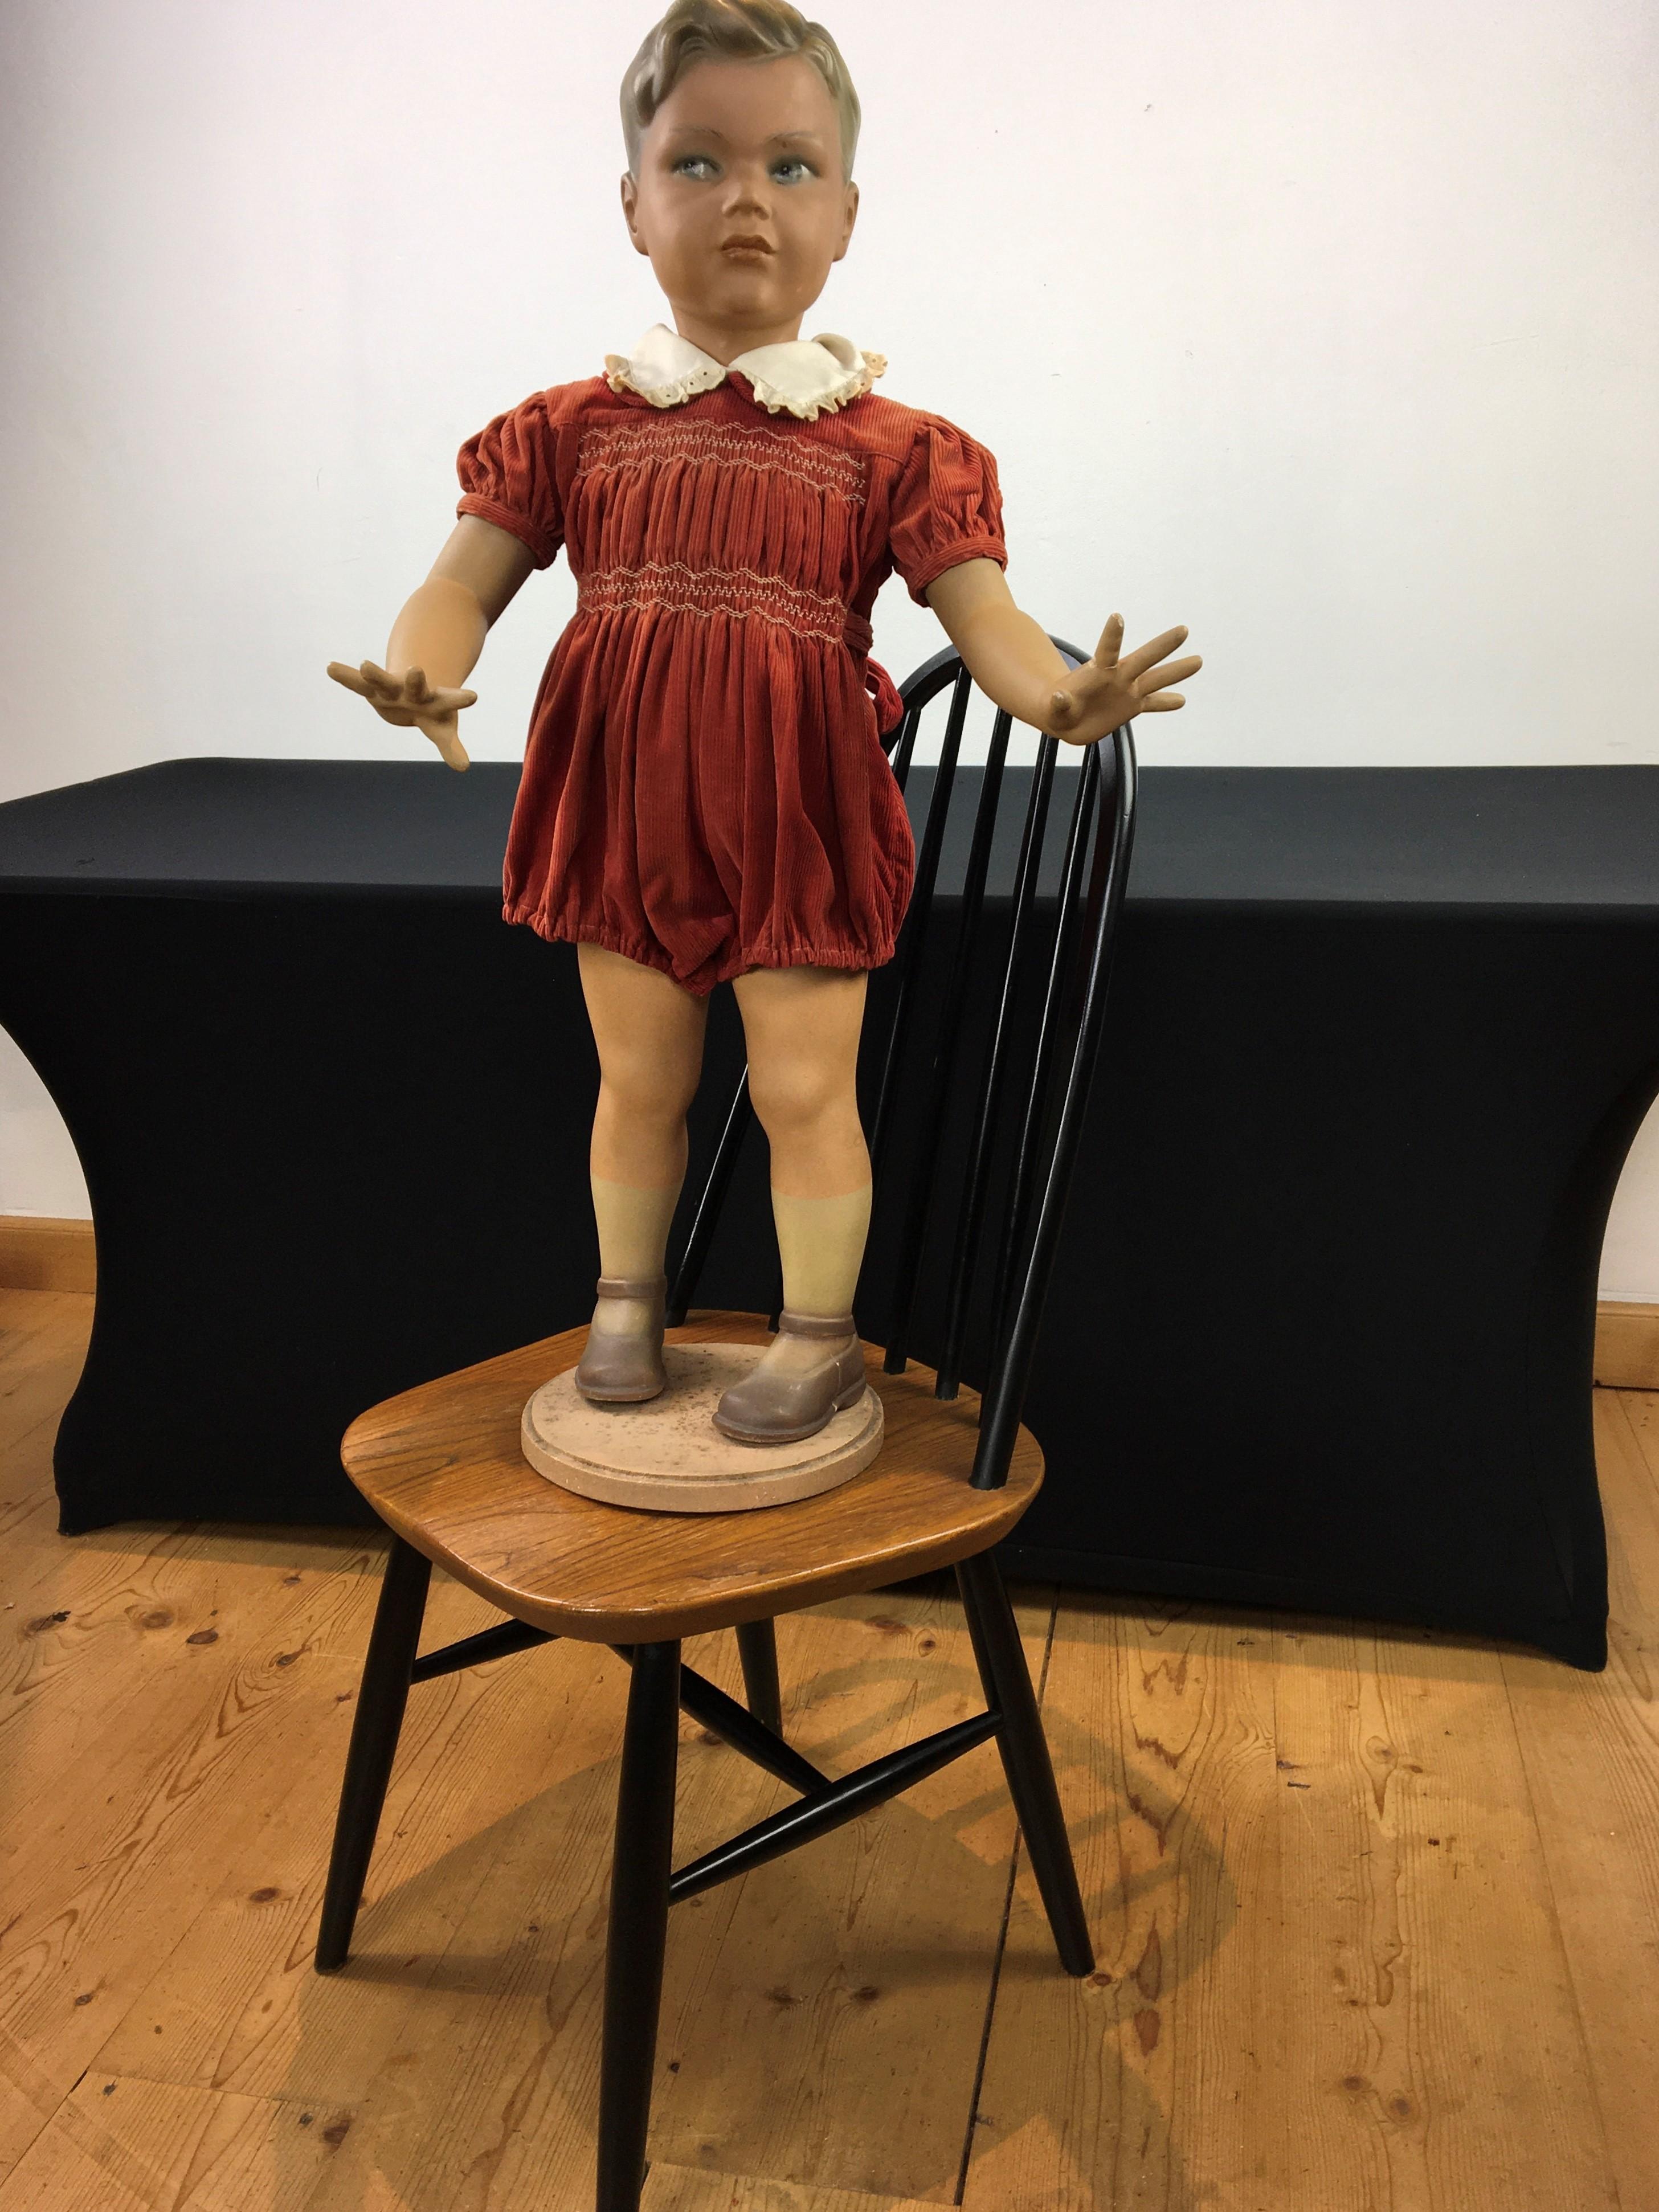 Art Deco store display boy - store display doll - child mannequin doll.
This antique child mannequin is a male child.
He has a painted plaster body, painted eyes and a painted wooden base. This store display advertising doll is probably designed for